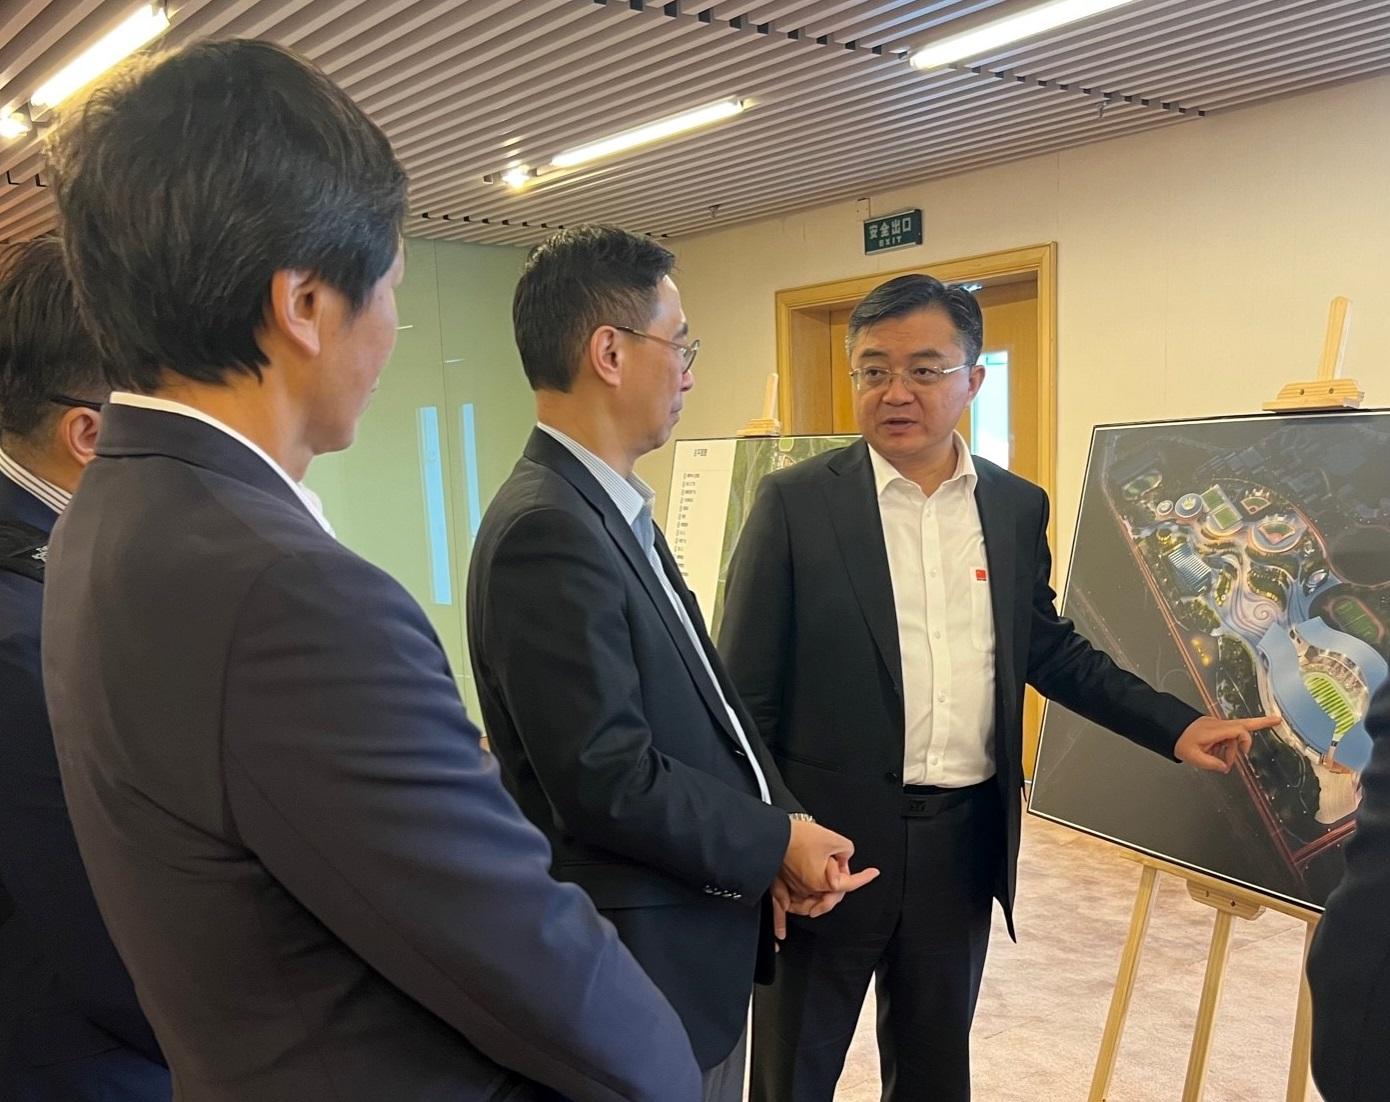 The Secretary for Culture, Sports and Tourism, Mr Kevin Yeung (second right), today (March 20) meets with the Head of the Sports Bureau of Guangdong Province, Mr Cui Jian (first right), in Guangzhou and learns about the improvement works of the Guangdong Olympic Sports Center.